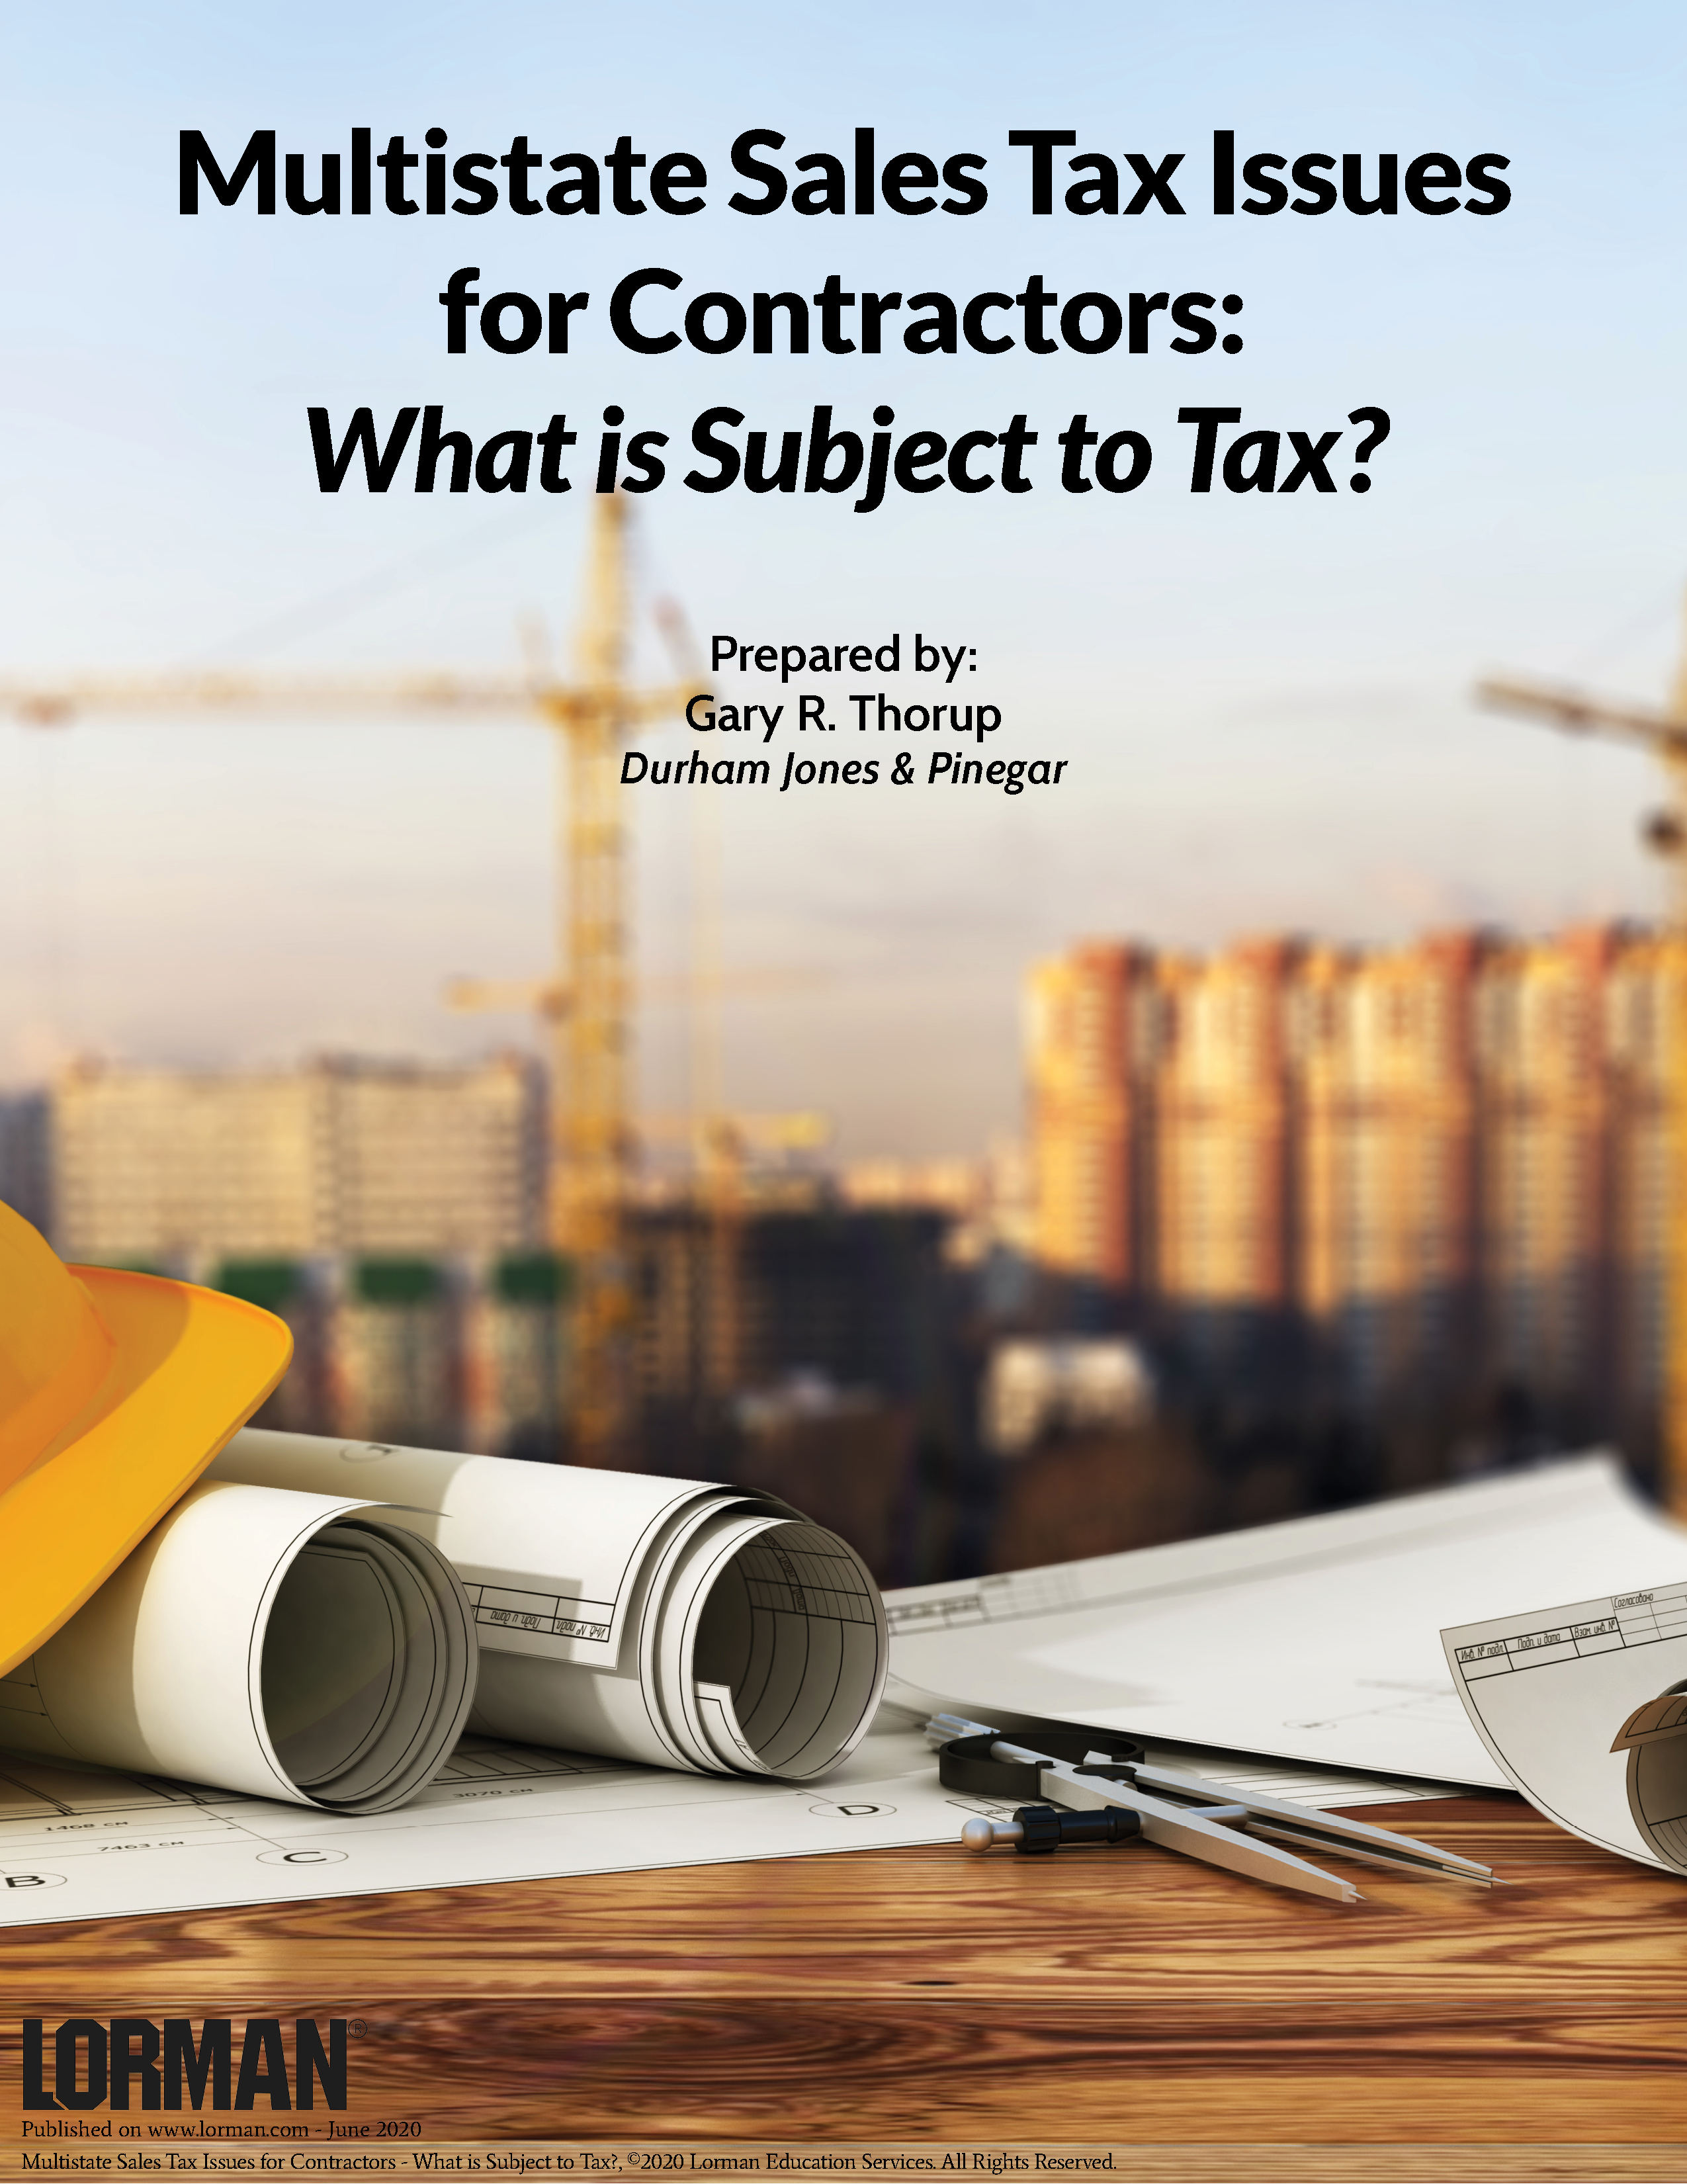 Multistate Sales Tax Issues for Contractors - What is Subject to Tax?